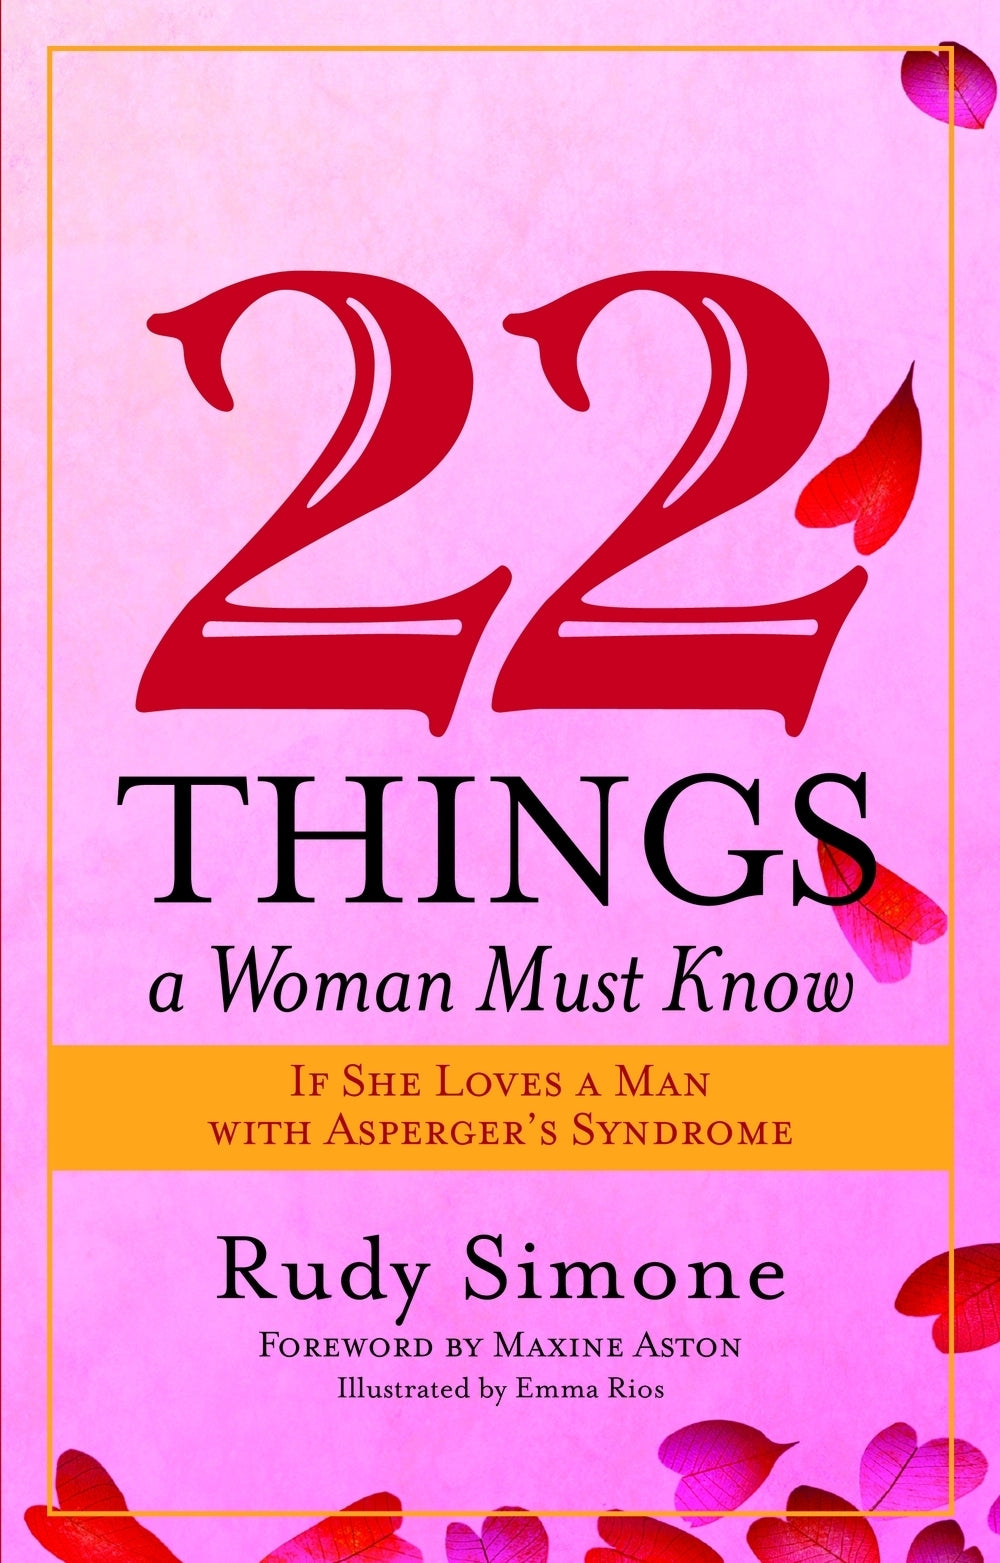 22 Things a Woman Must Know If She Loves a Man with Asperger's Syndrome by Maxine Aston, Rudy Simone